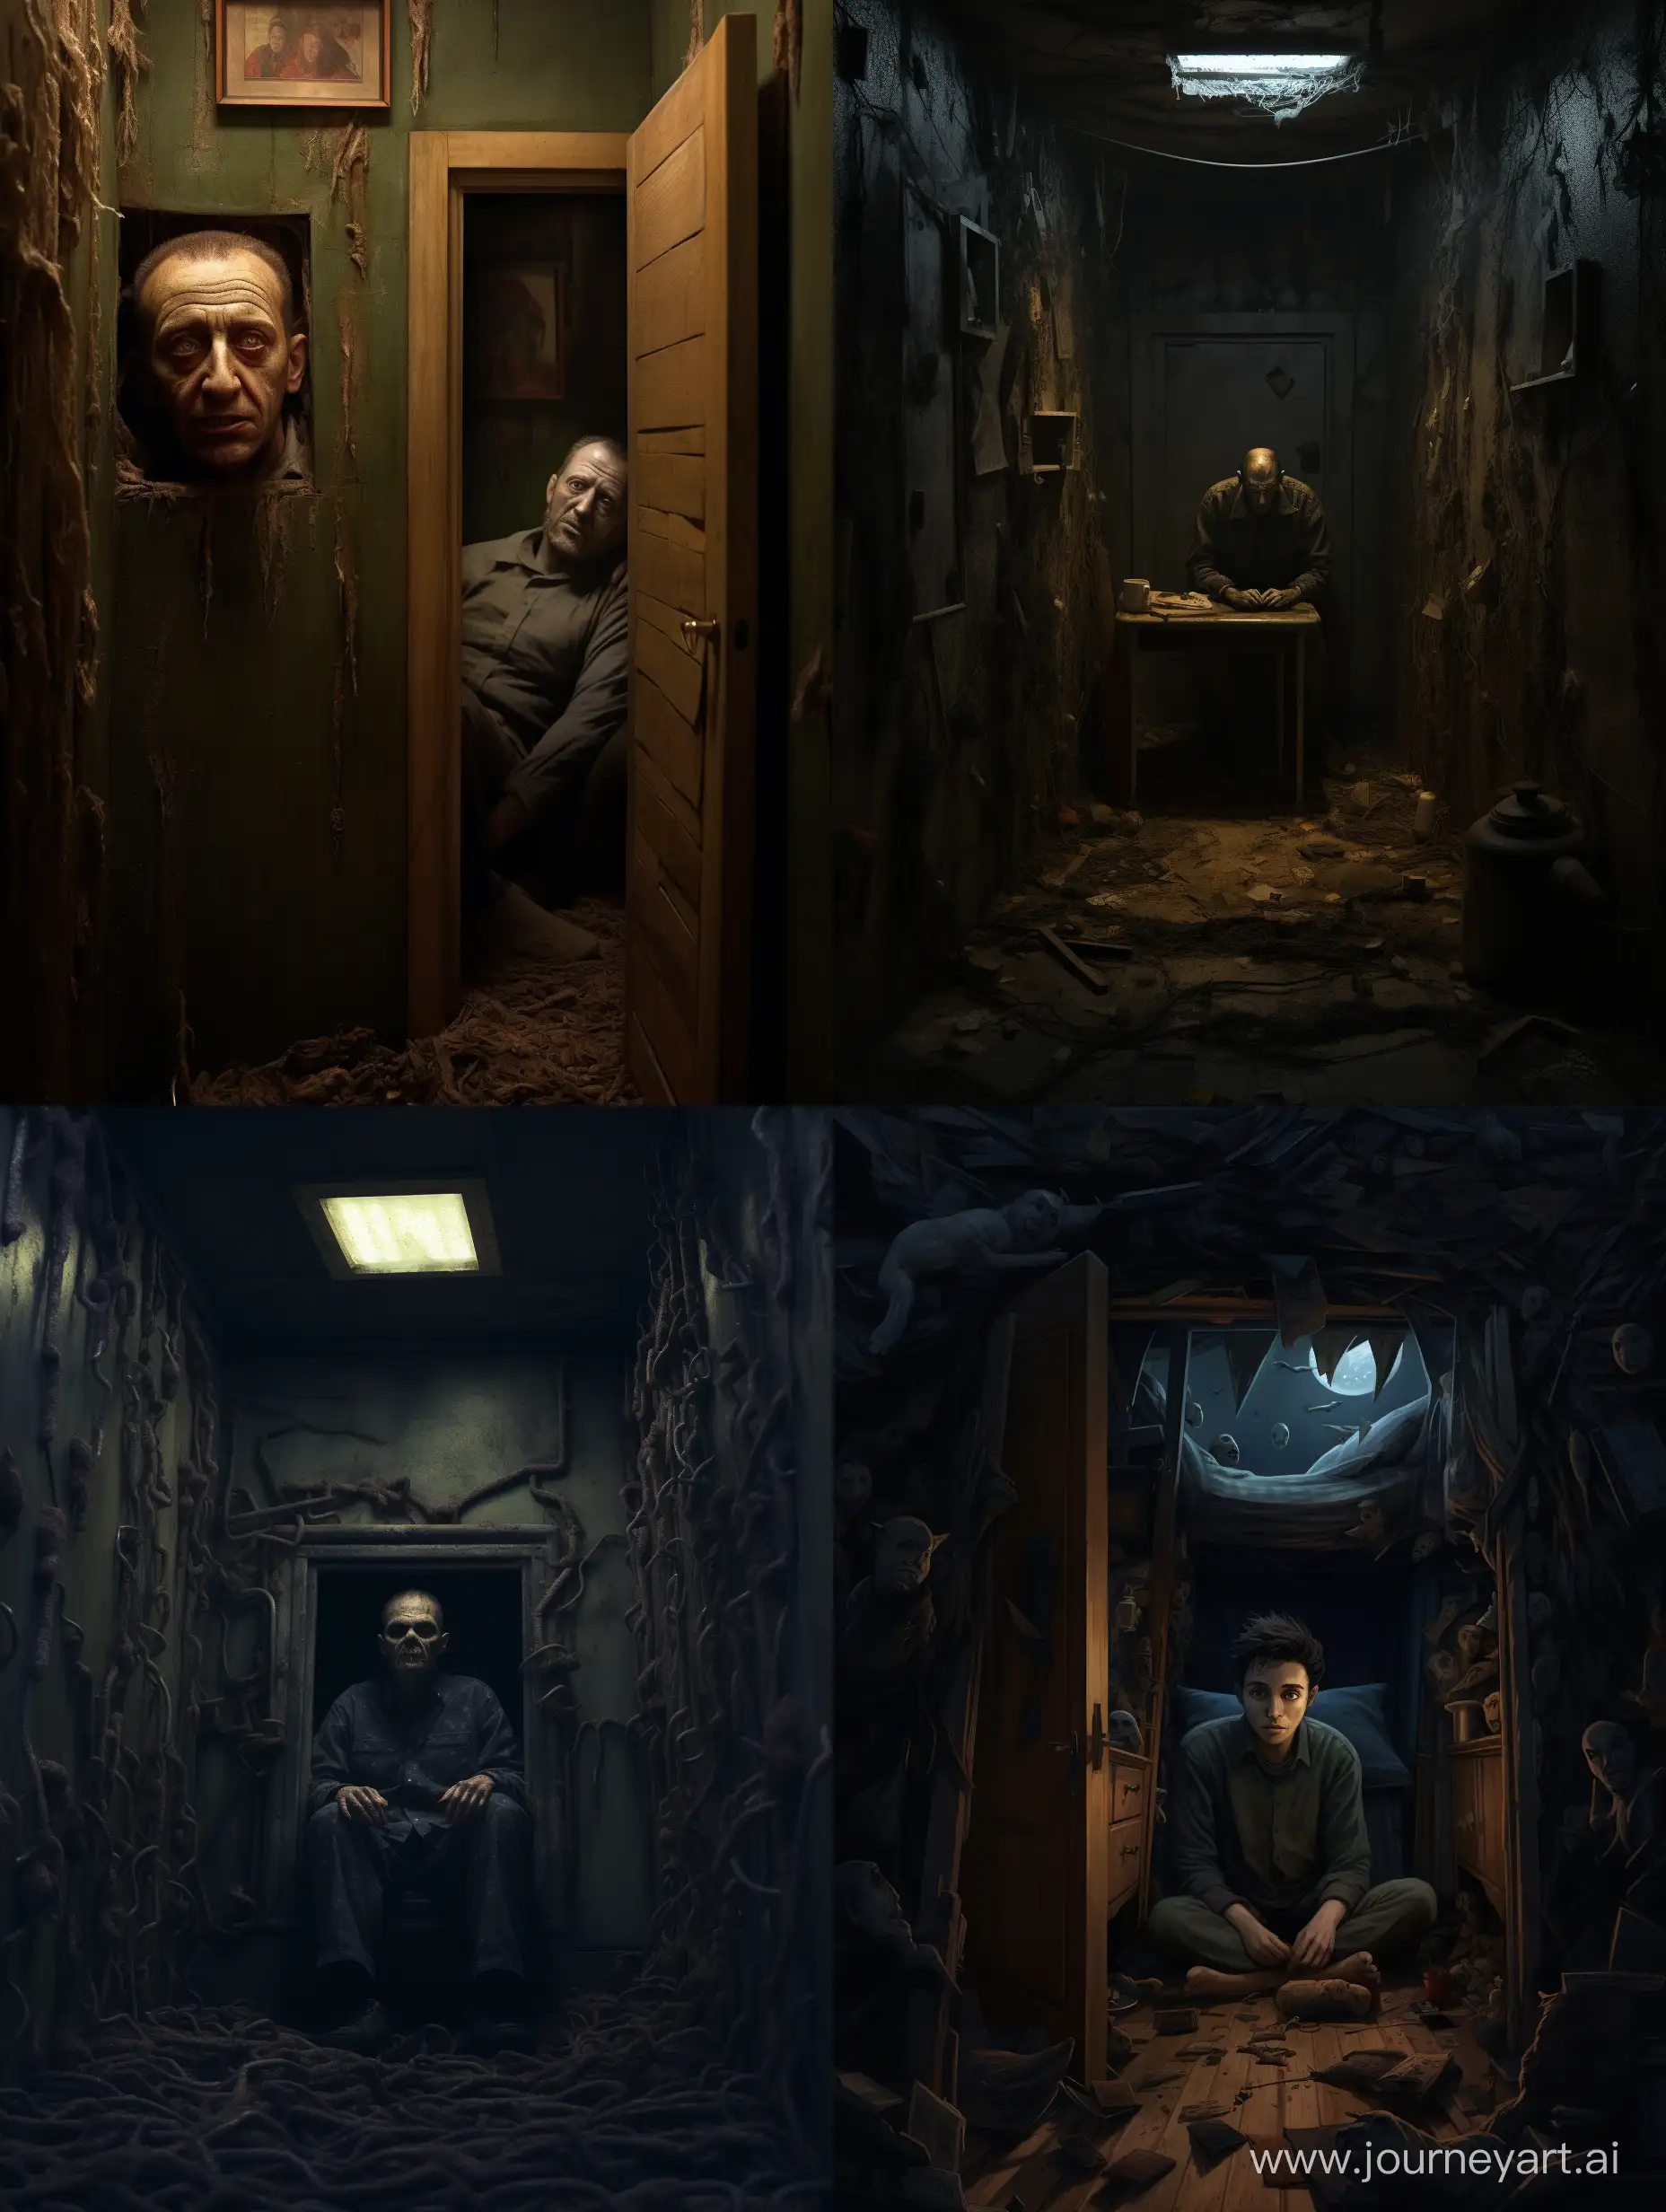 A scary man trapped in a small room